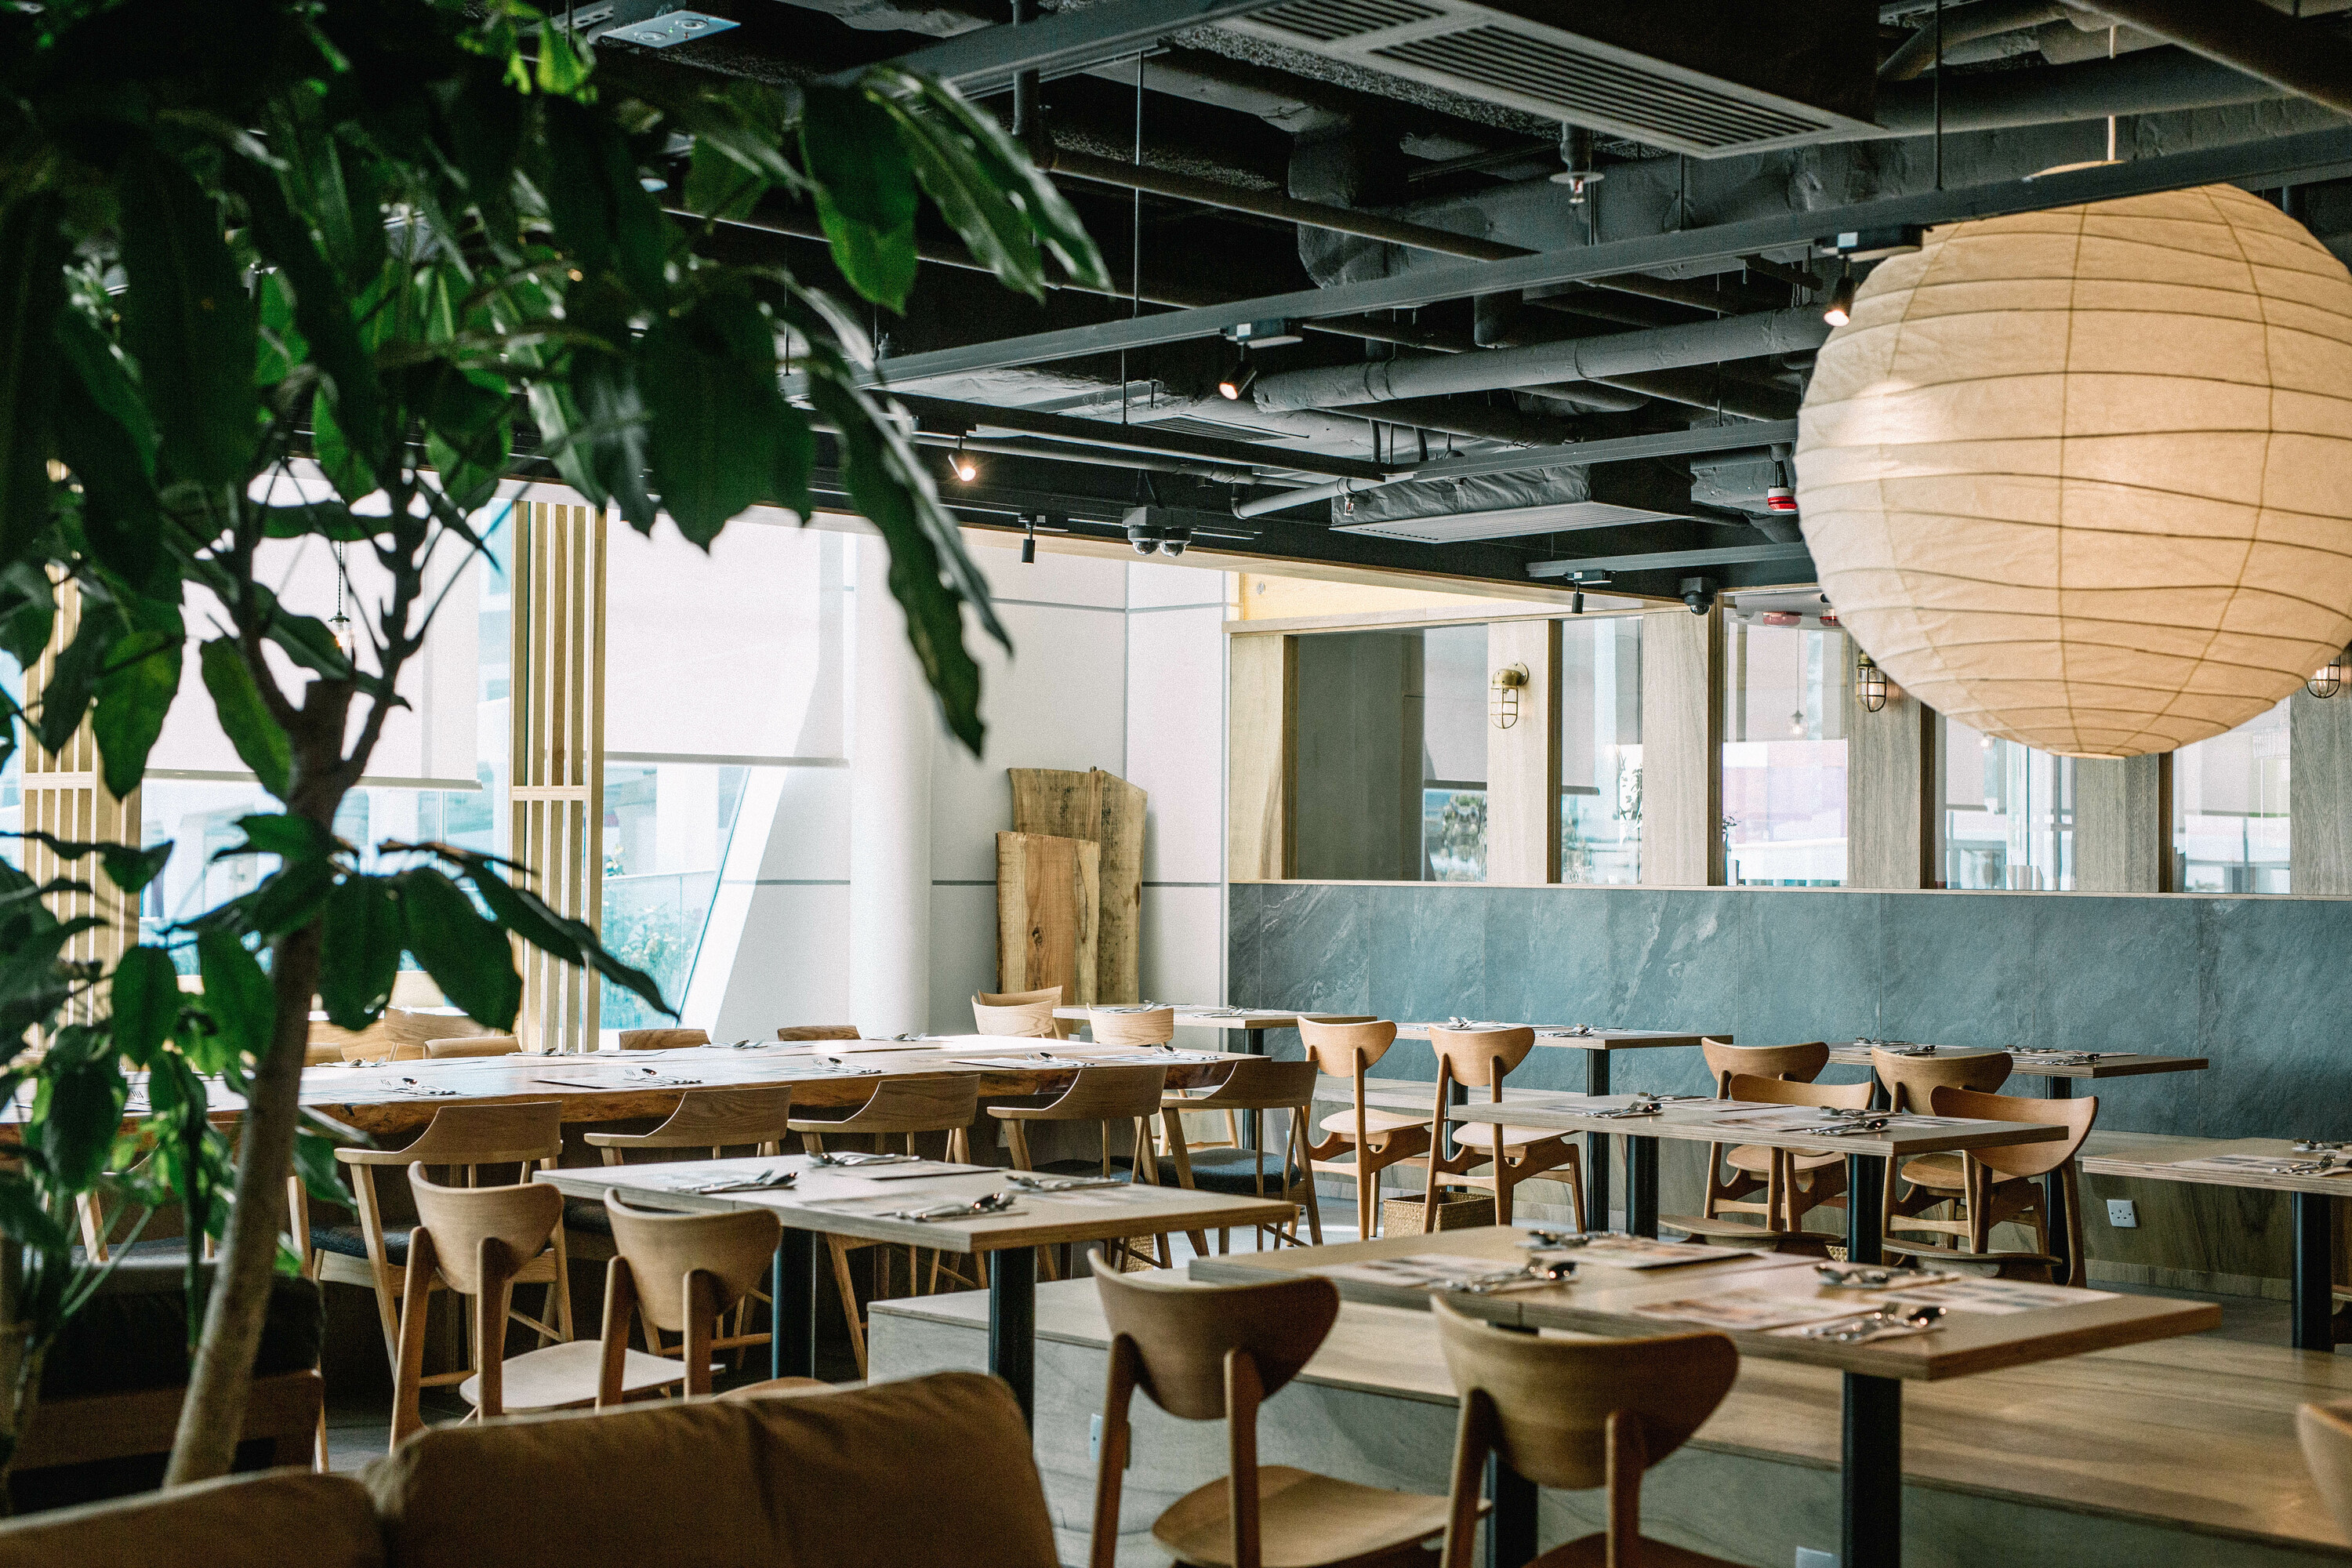 Best cafes and coffee shops to visit in New Territories — Time Out Hong Kong